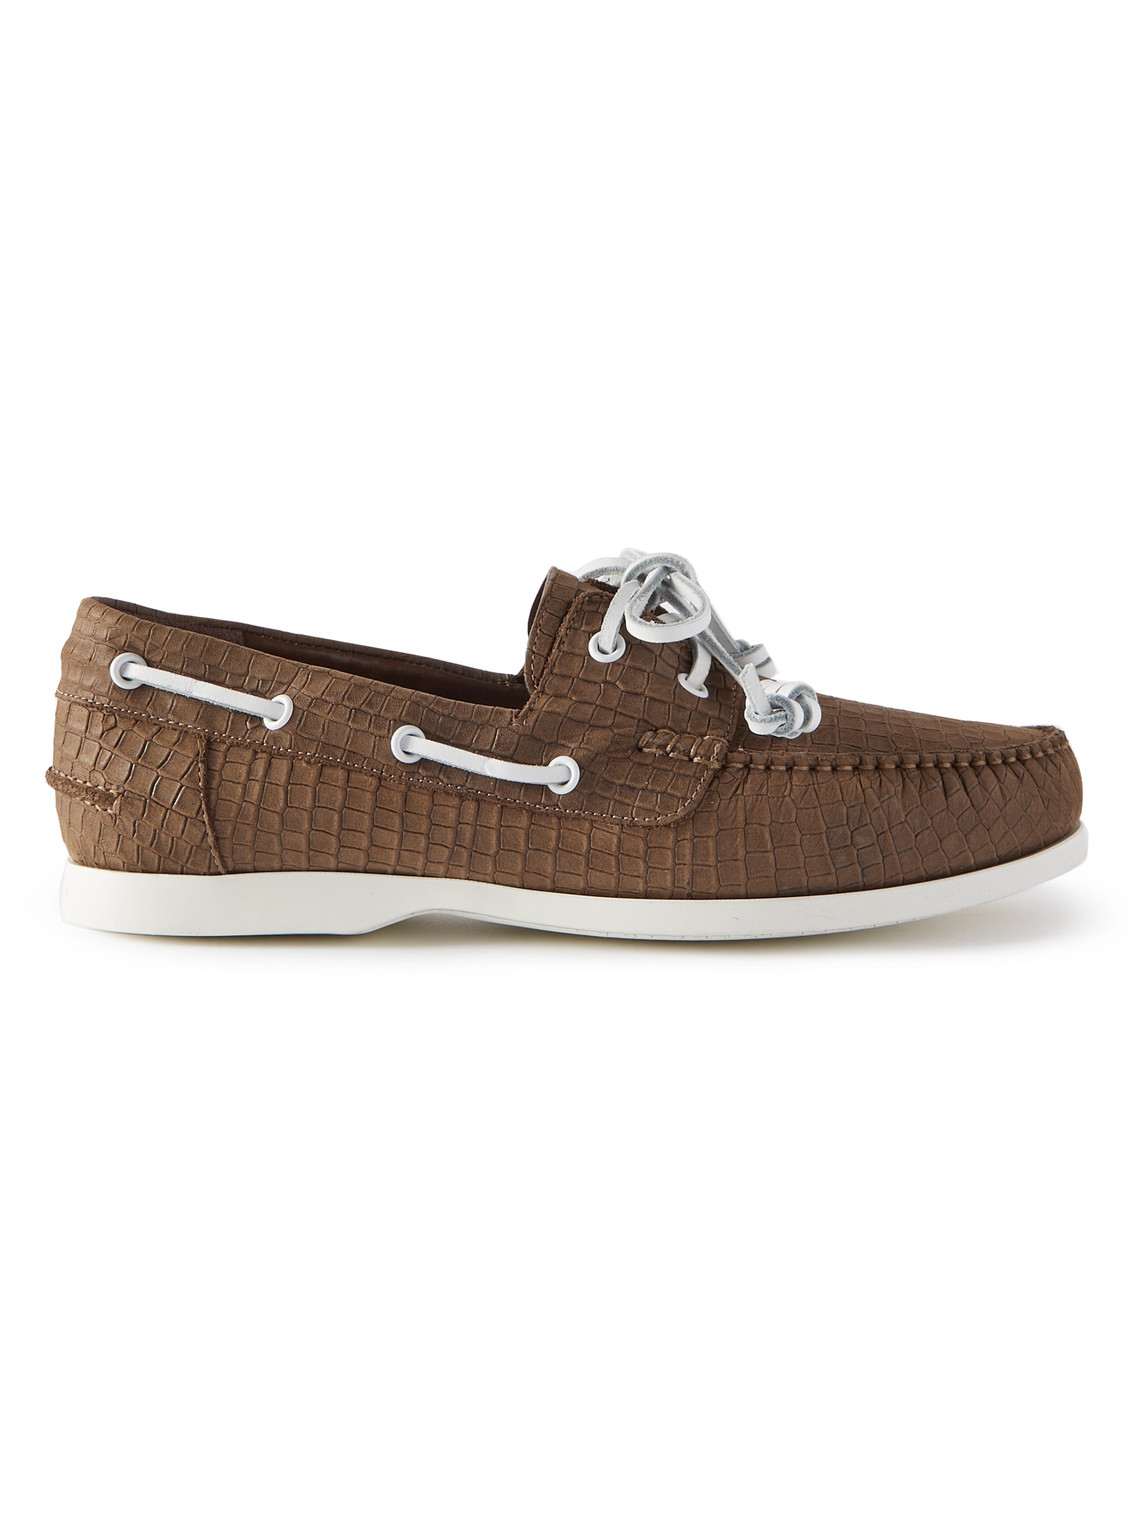 Sidmouth Croc-Effect Nubuck Boat Shoes